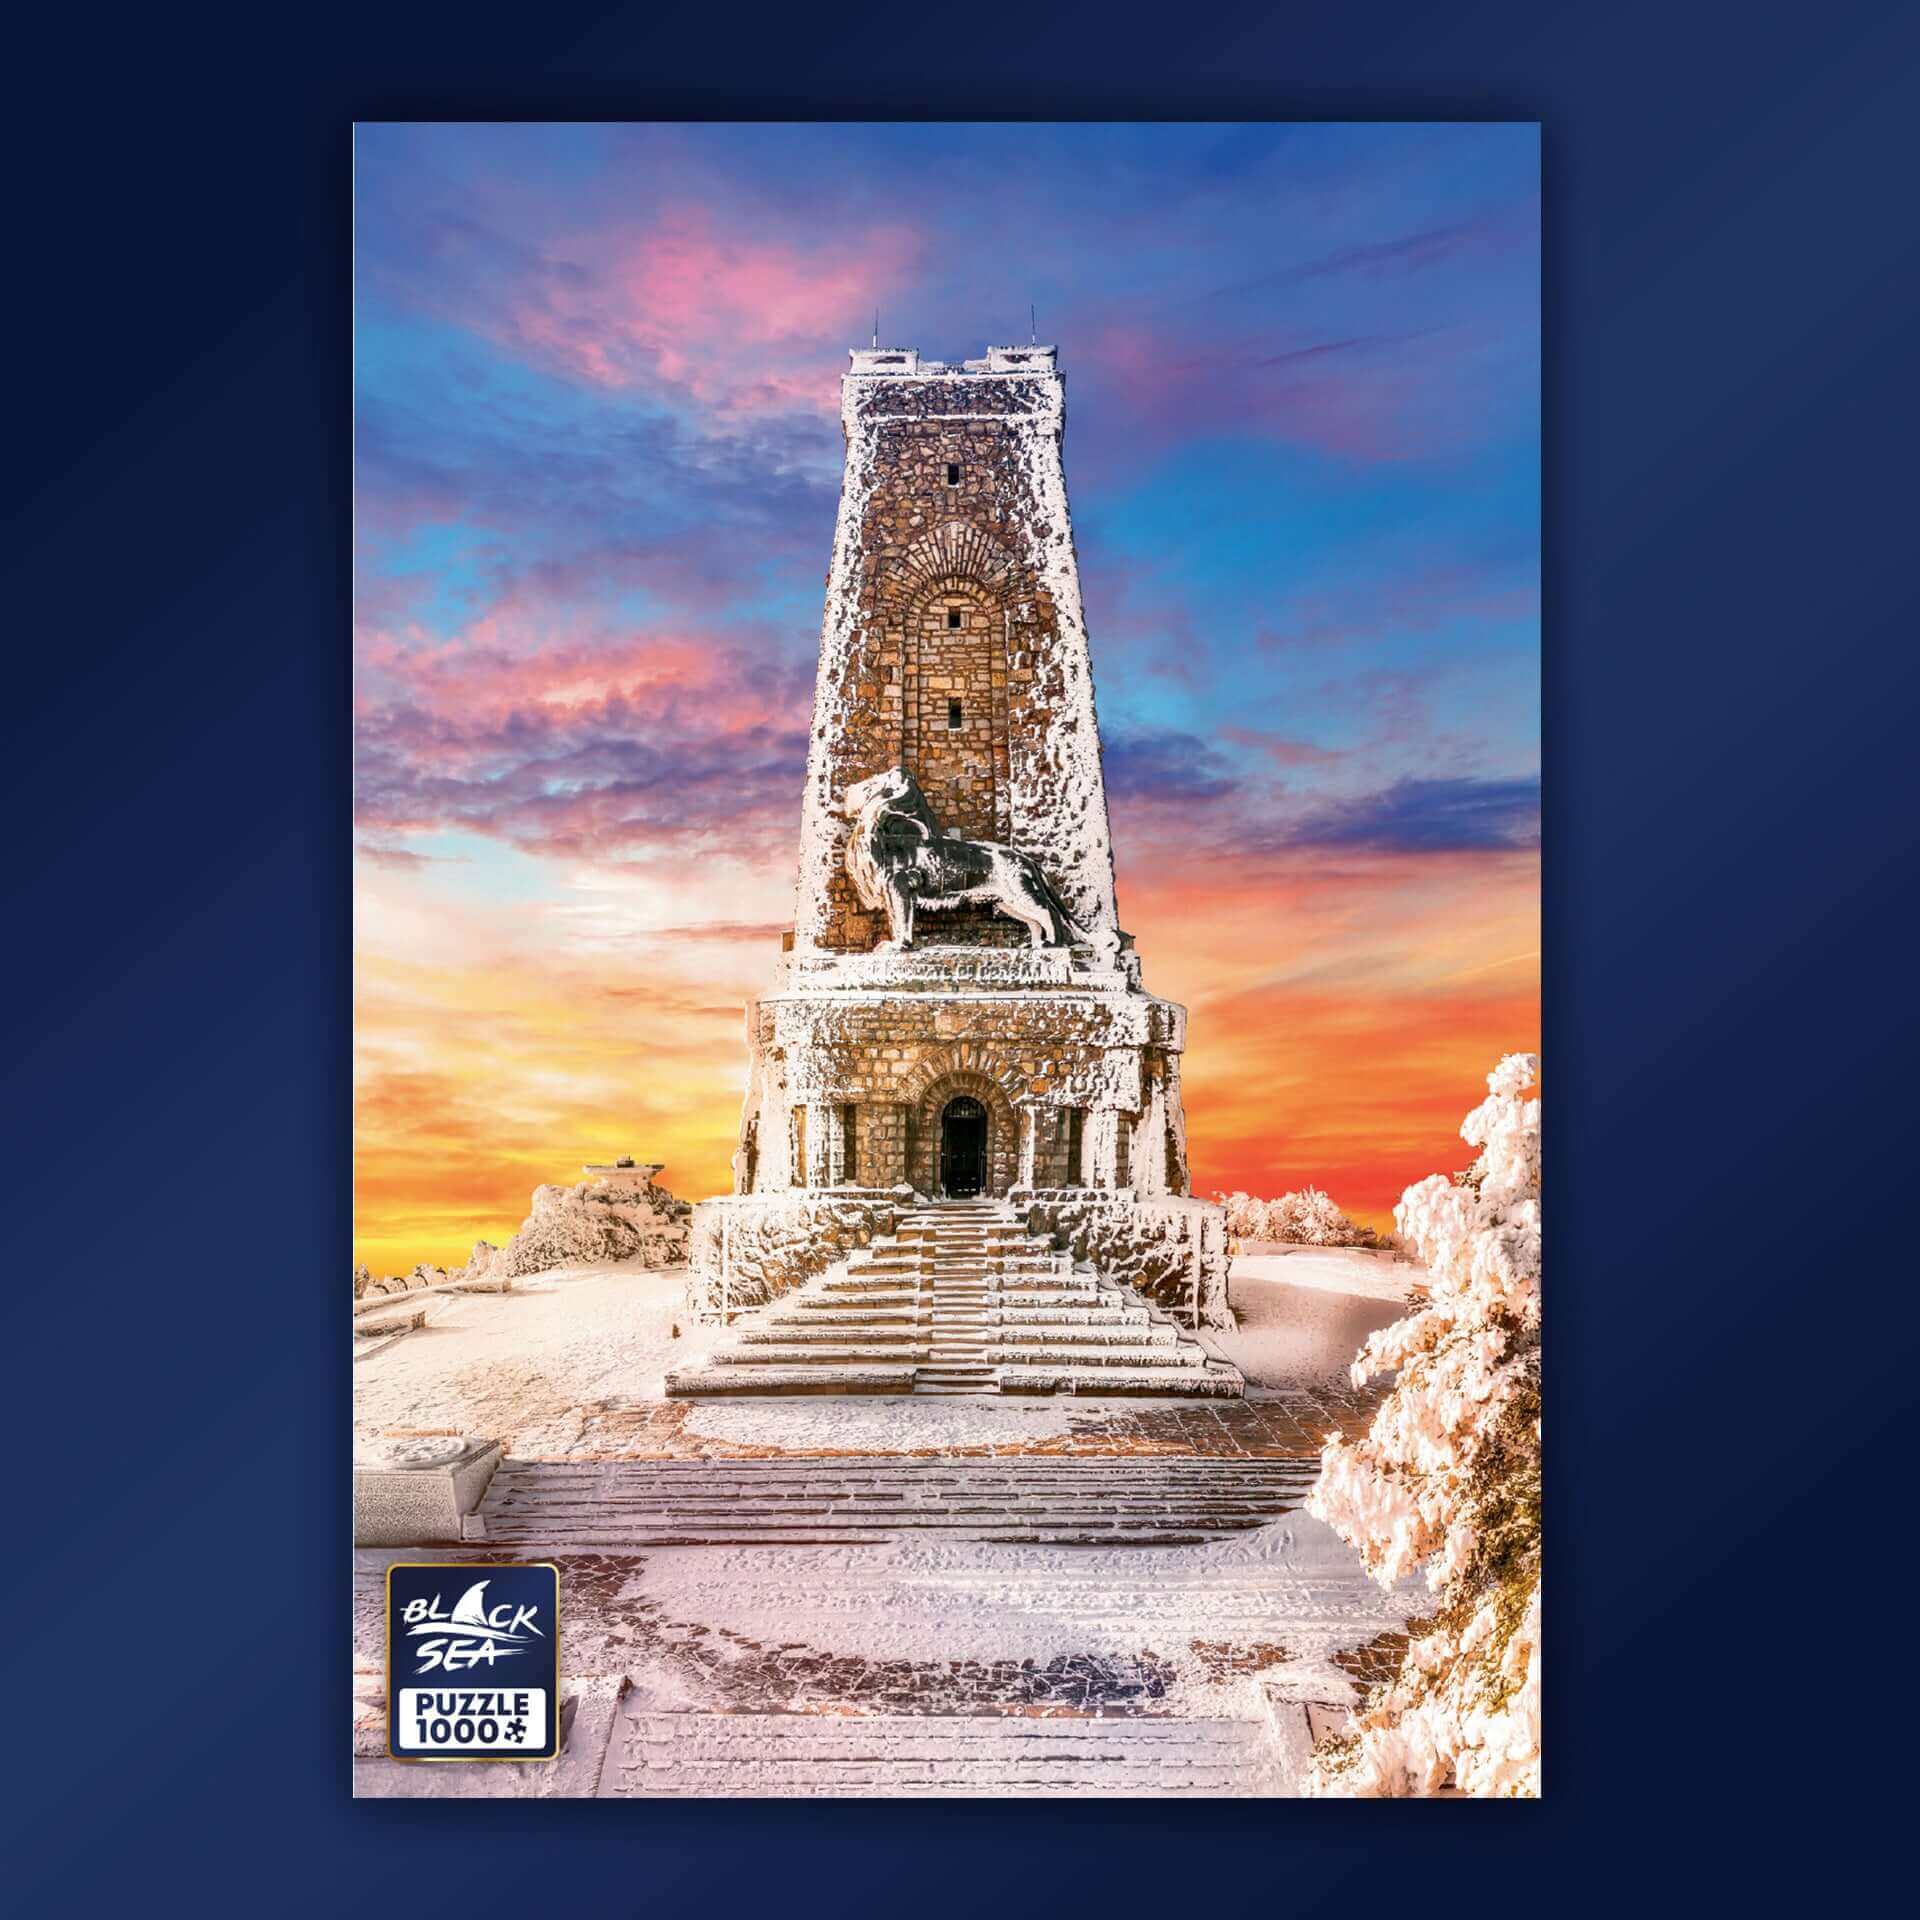 Puzzle Black Sea Premium 1000 pieces - Shipka, the Symbol of Freedom, For Bulgarians, Mount Shipka symbolizes the liberation of their country, the heroic deeds of their ancestors and their brave spirit. The monument of the liberation at the top of the mou